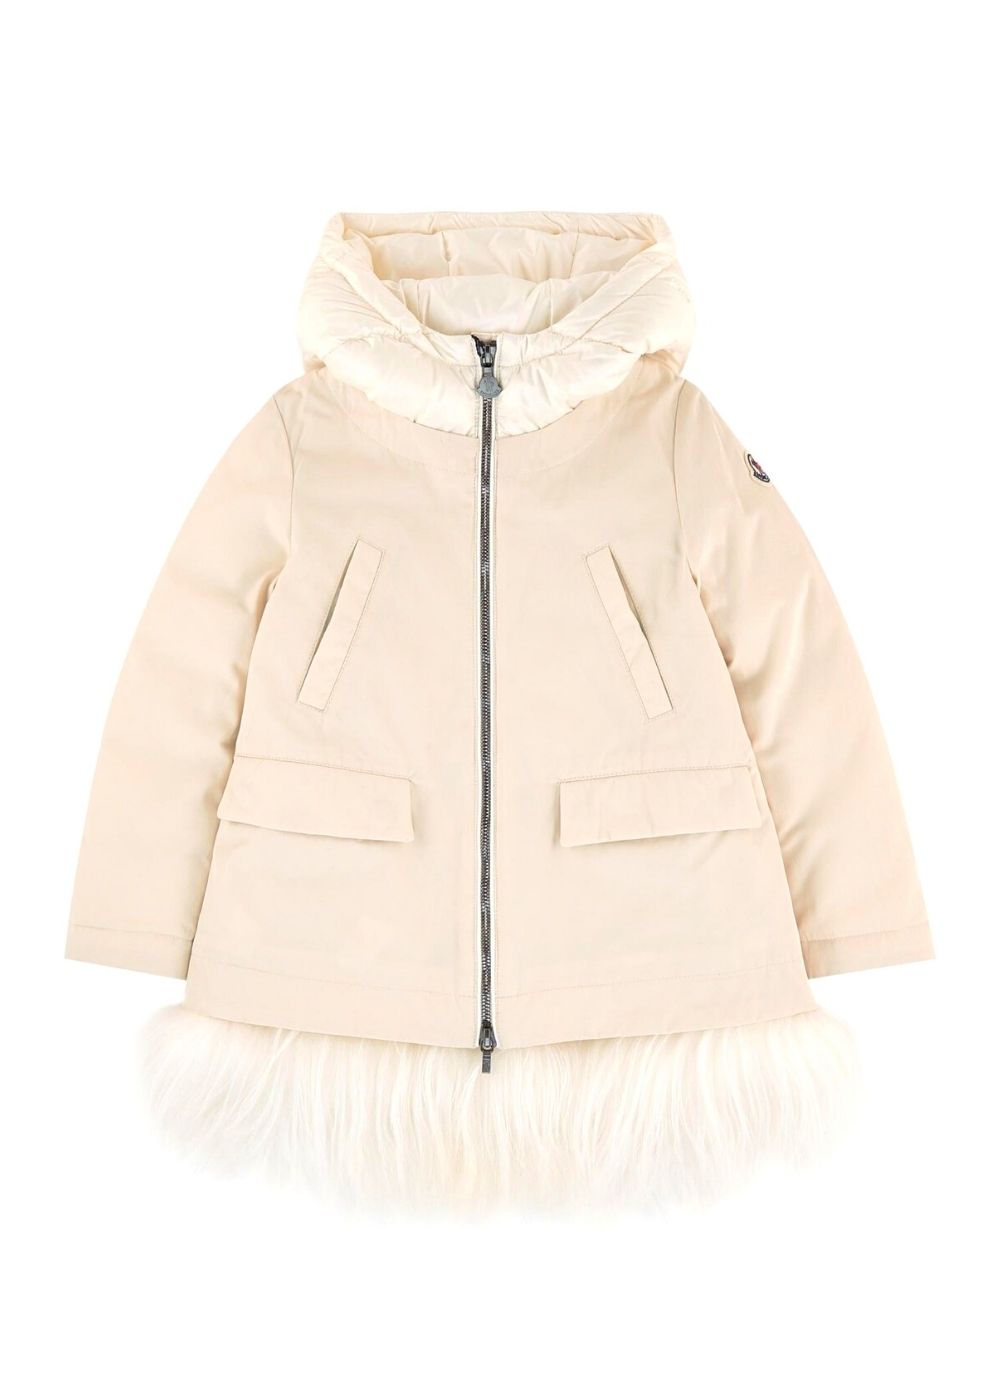 Featured image for “MONCLER CHEVRONNE ROSA CHIARO”